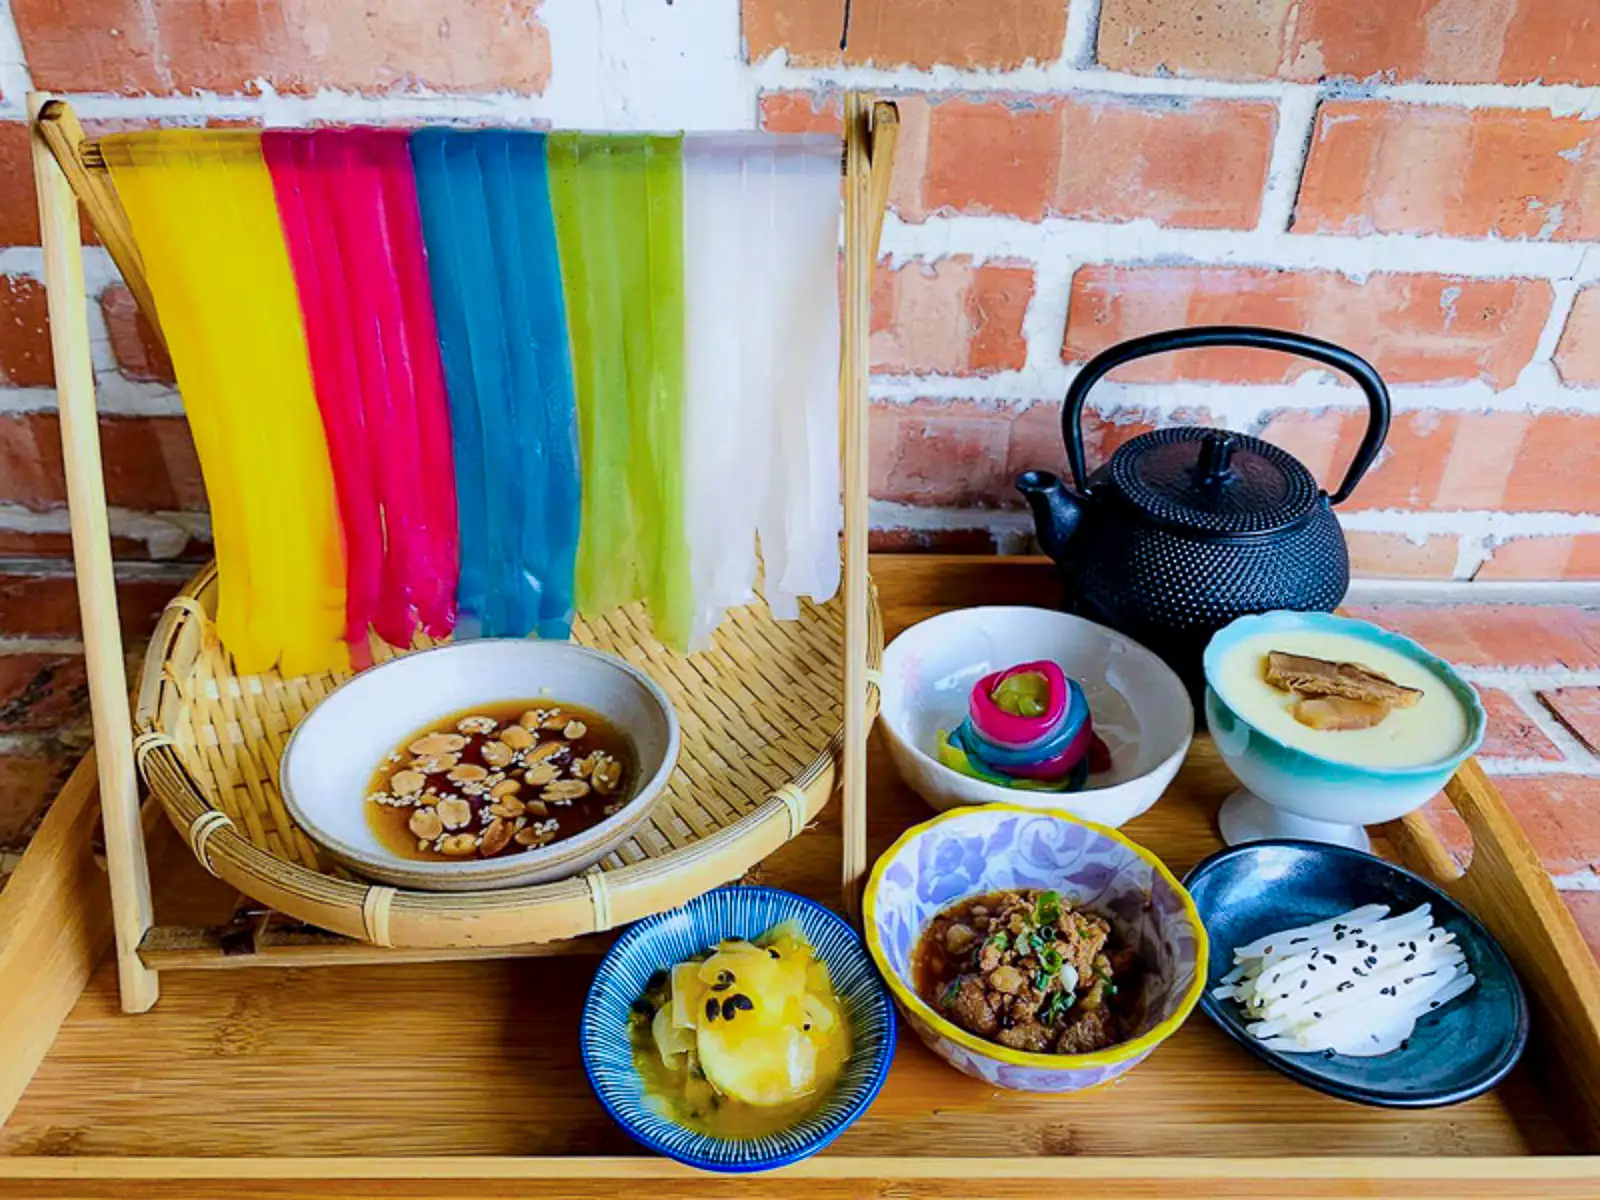 A tray features a set meal of rainbow noodles, ground pork, steamed egg, a passion fruit-based dessert, and more.